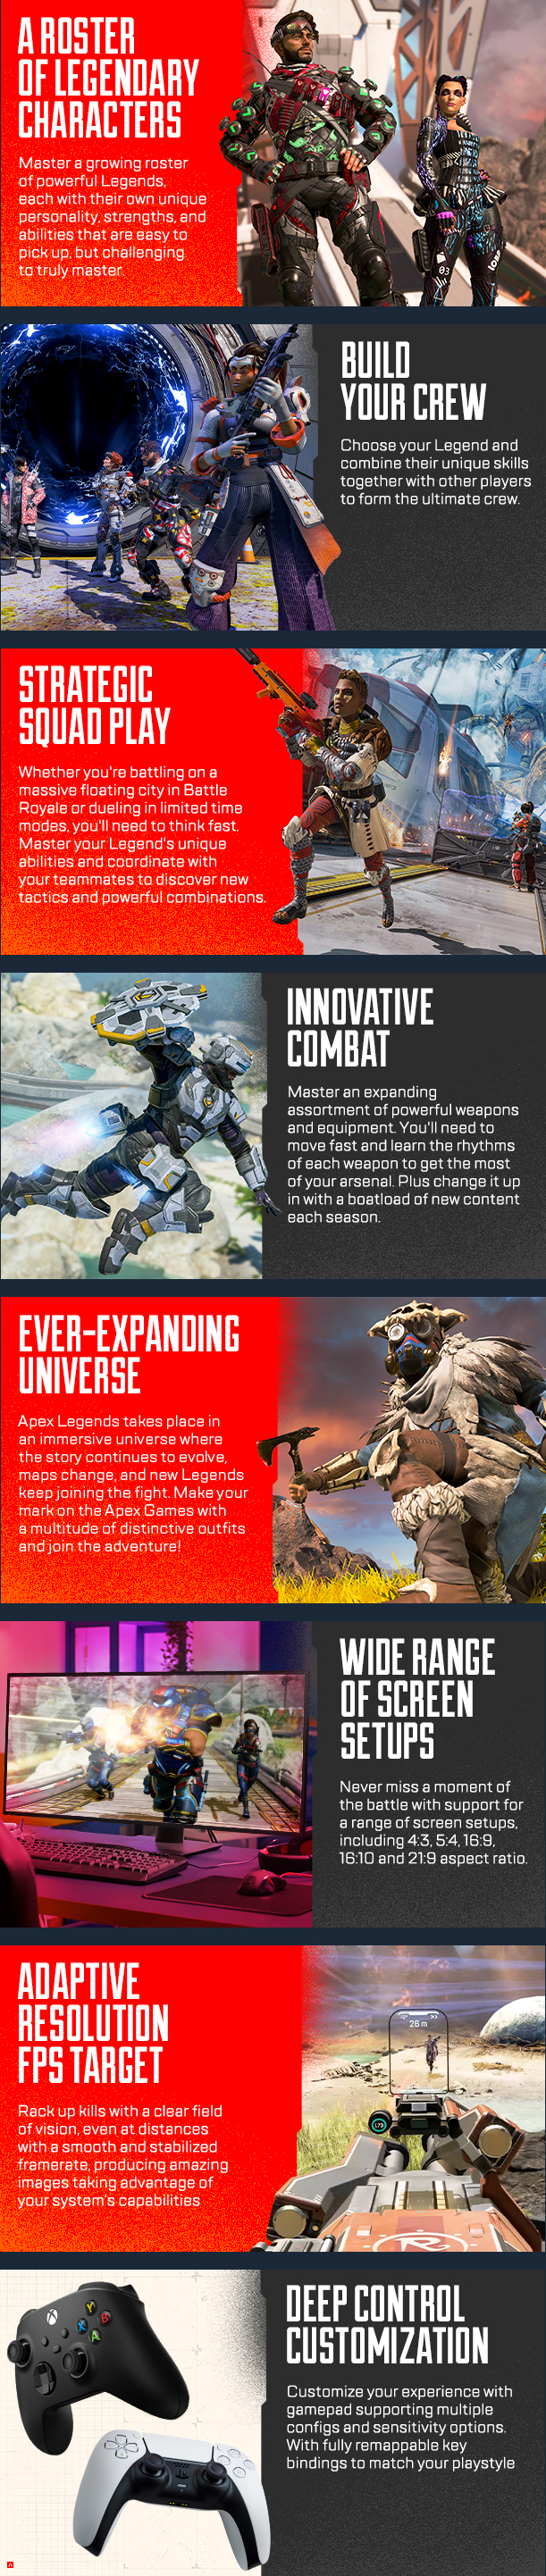 Apex Legends™ Game Overview – An Official EA Site